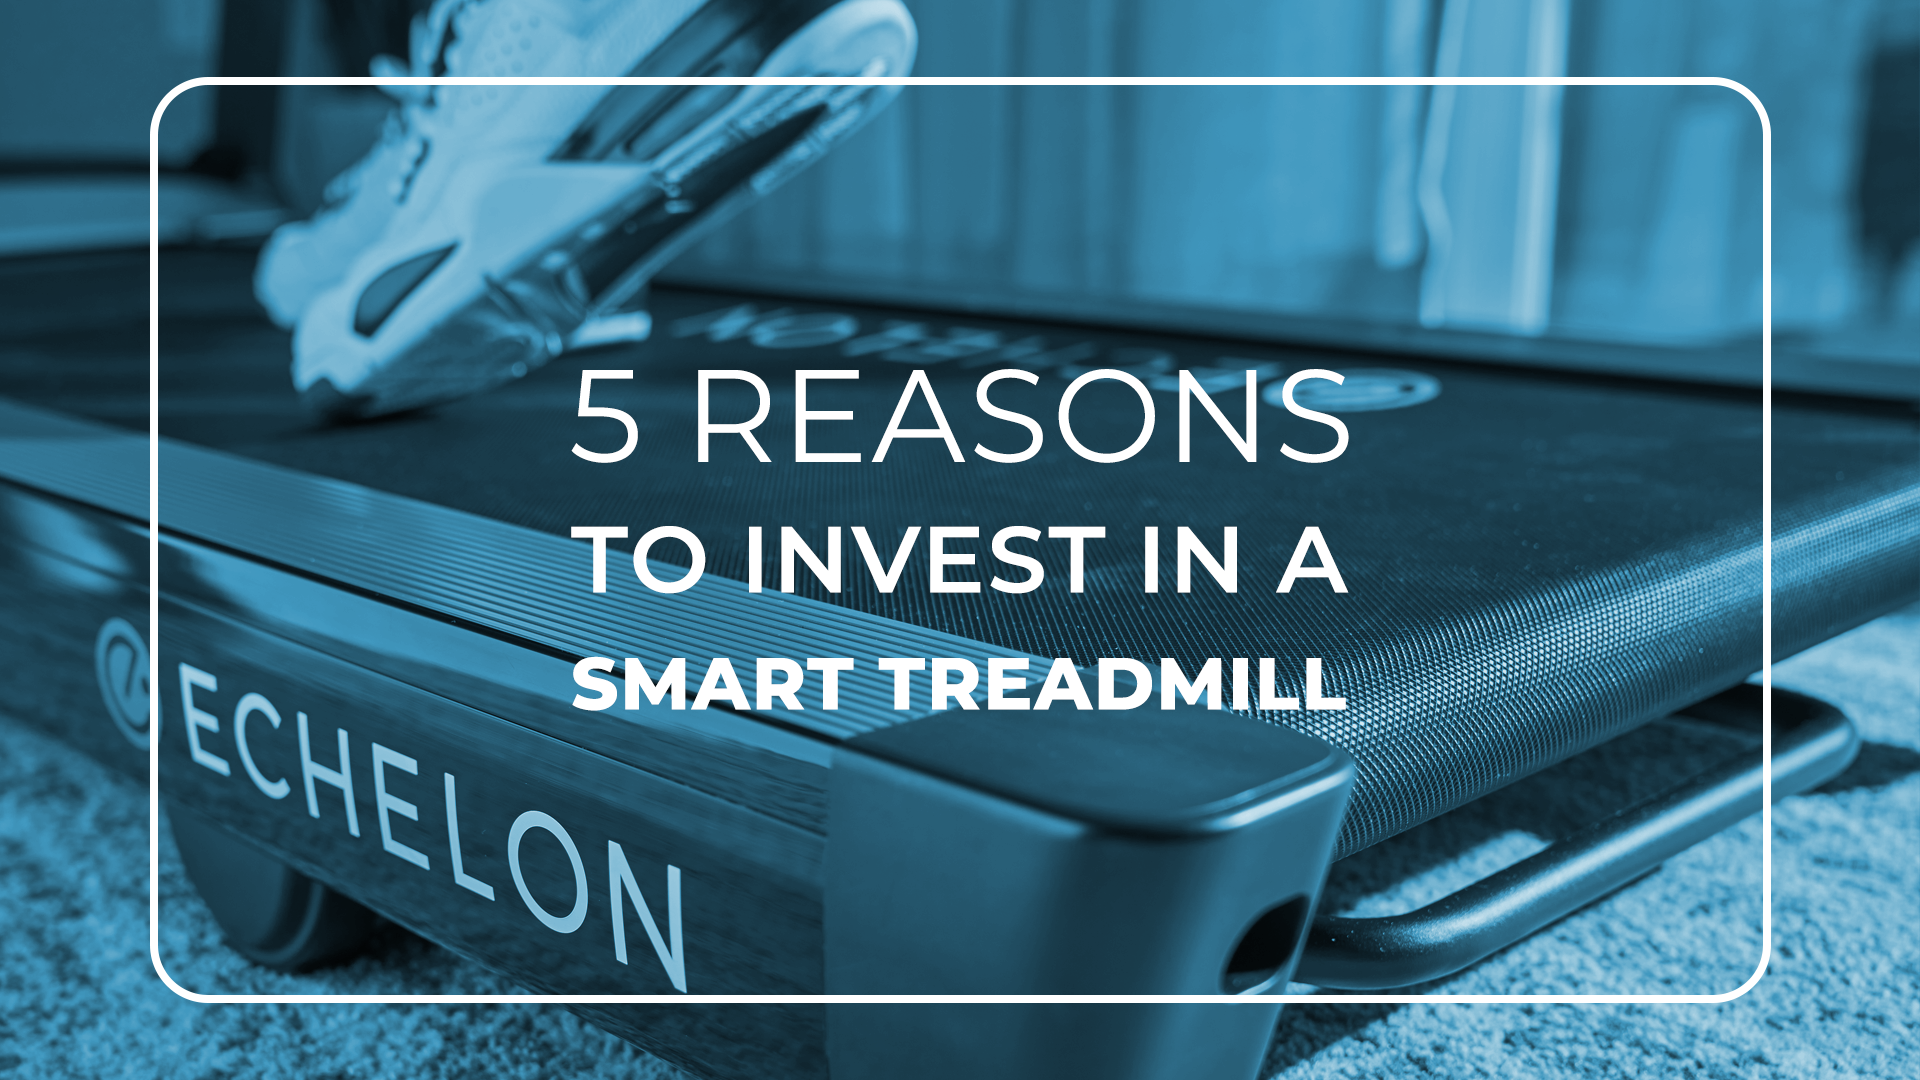 5 Reasons Why You Should Invest in a Smart Treadmill